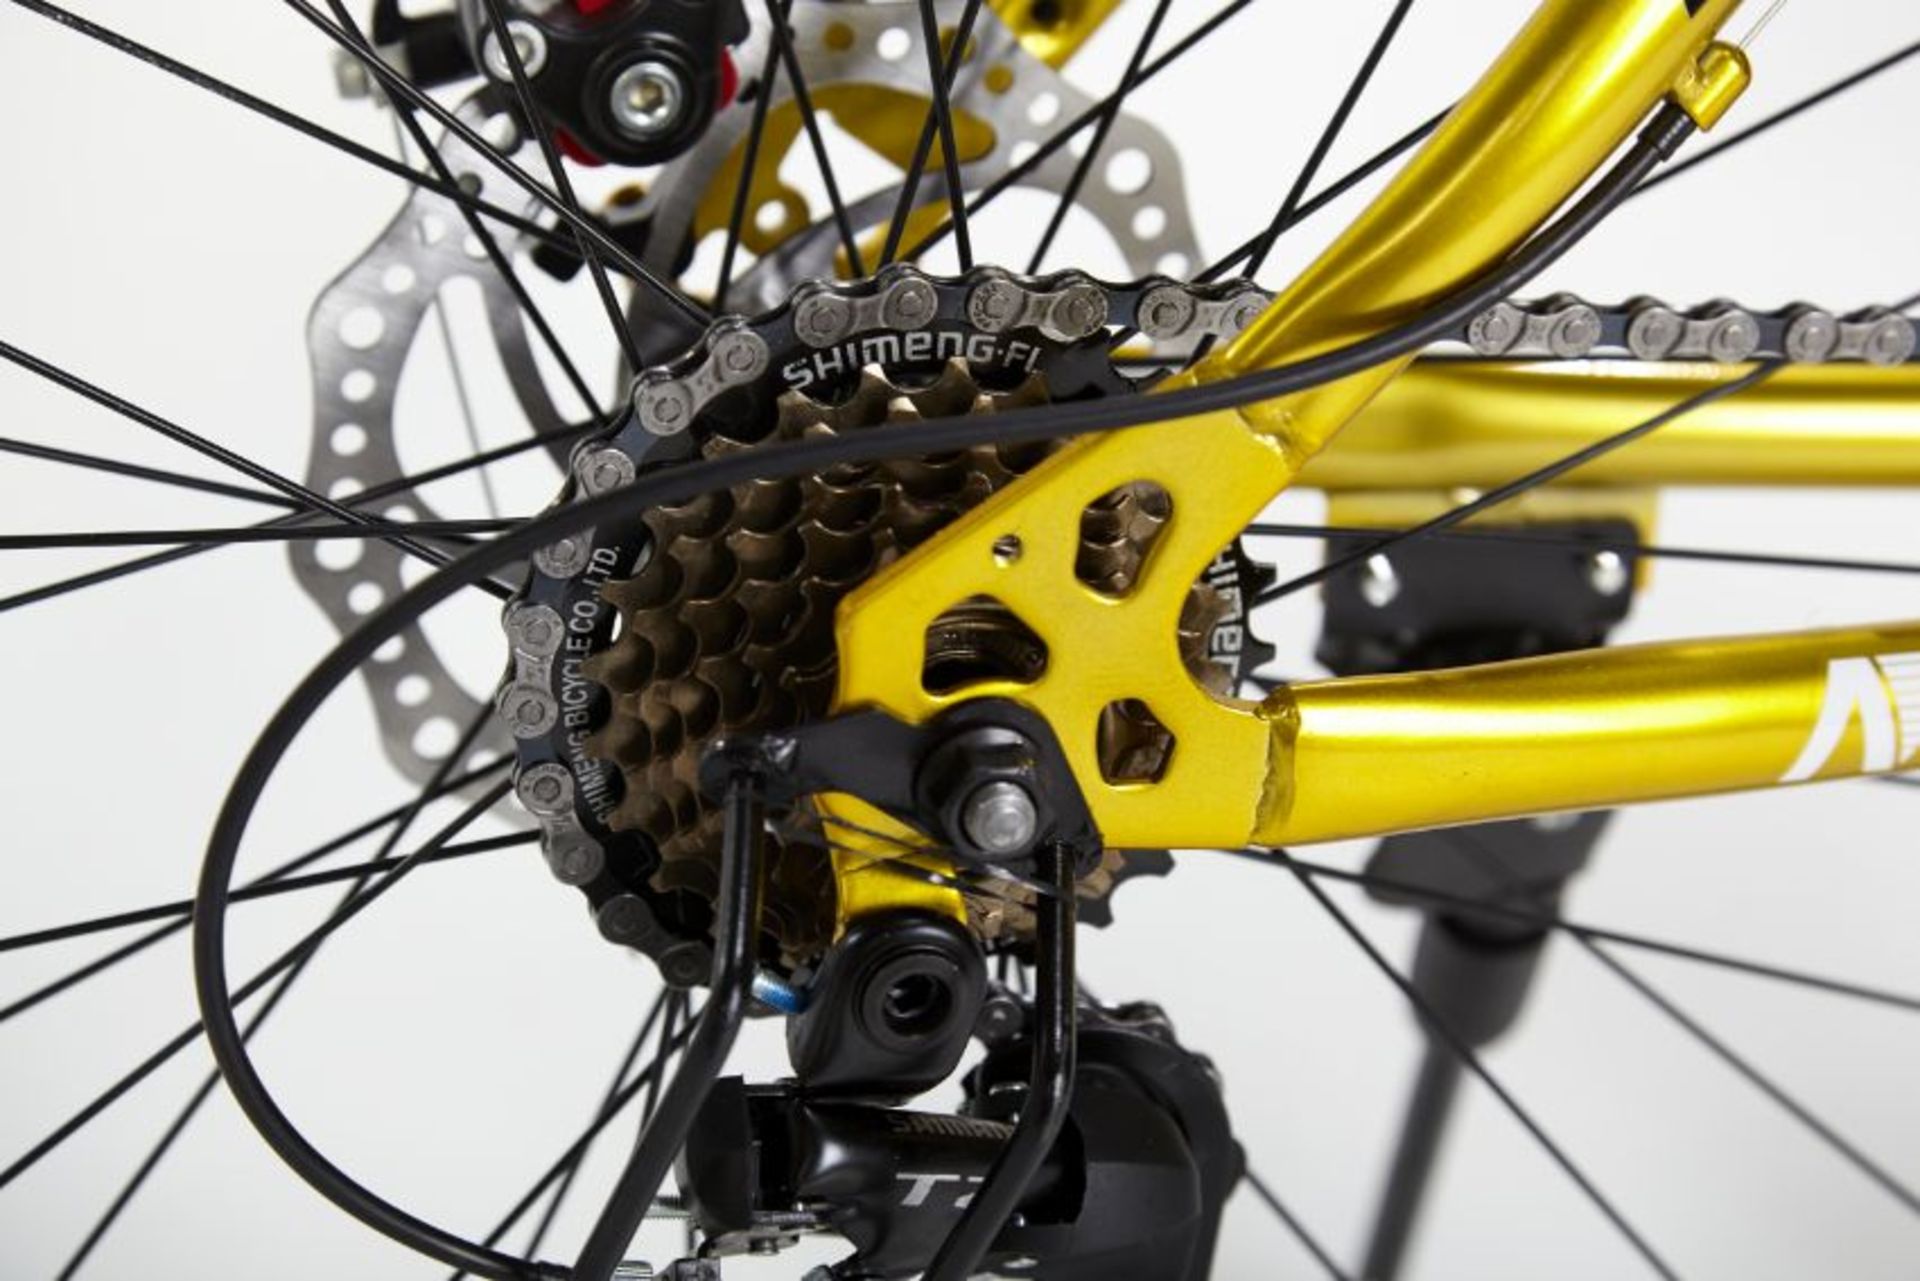 5 X BRAND NEW NEW SPEED 21 GEARS STUNNING SUSPENSION GOLD COLOURED MOUNTAIN BIKE - Image 8 of 11